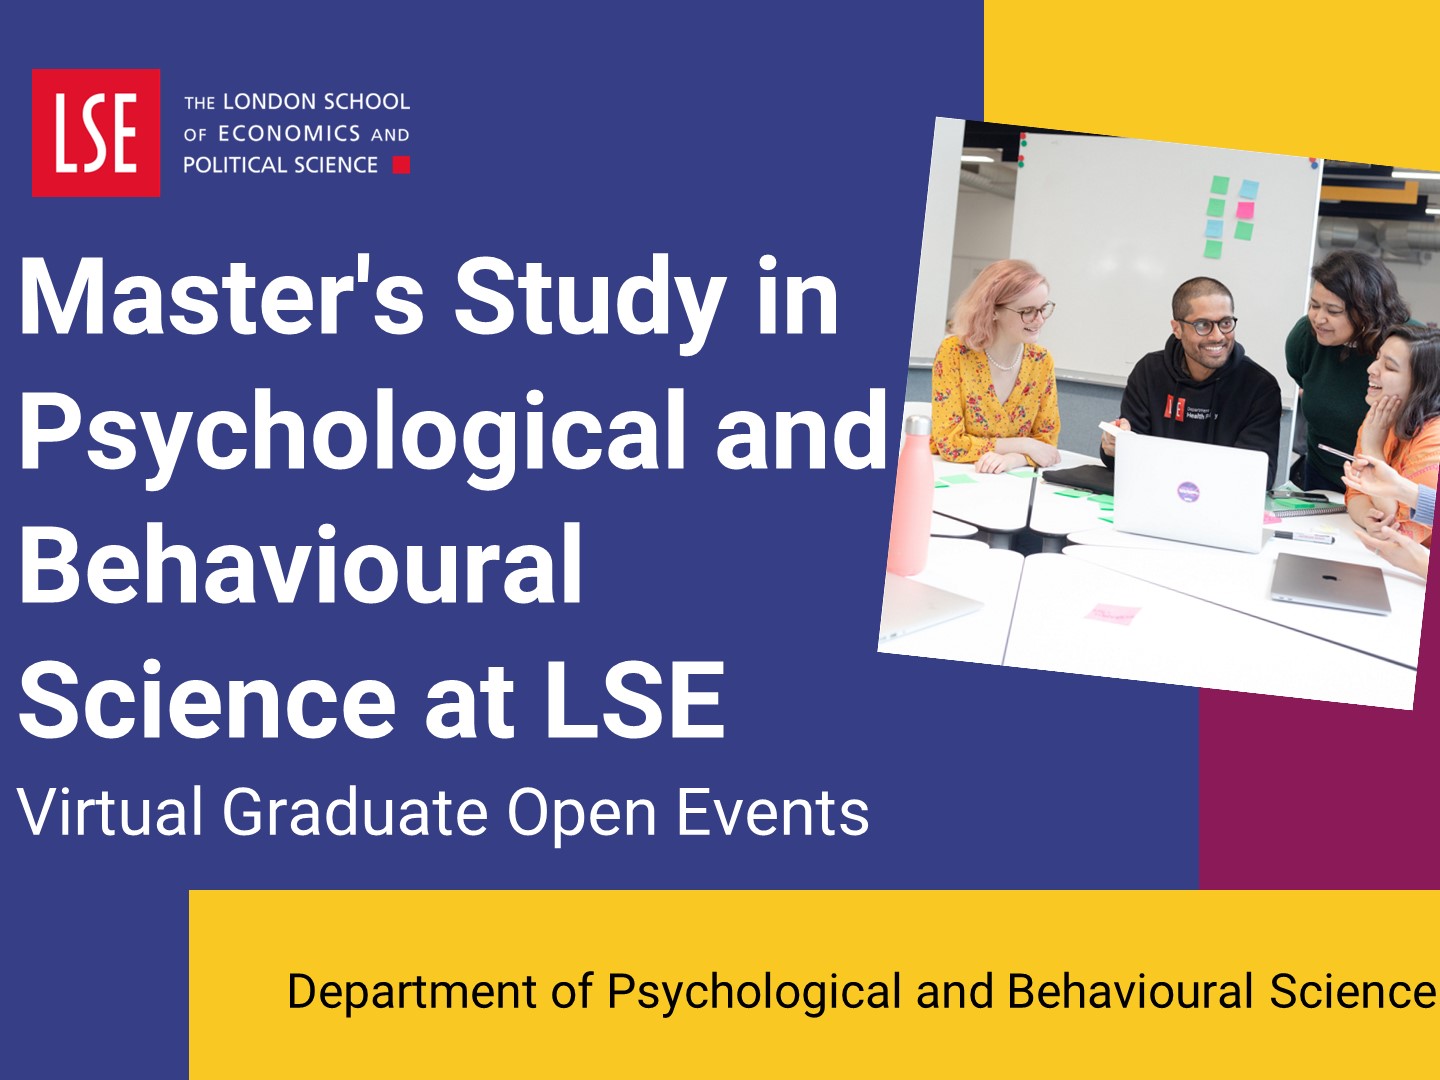 Introduction to master's study in Psychological and Behavioural Science at LSE